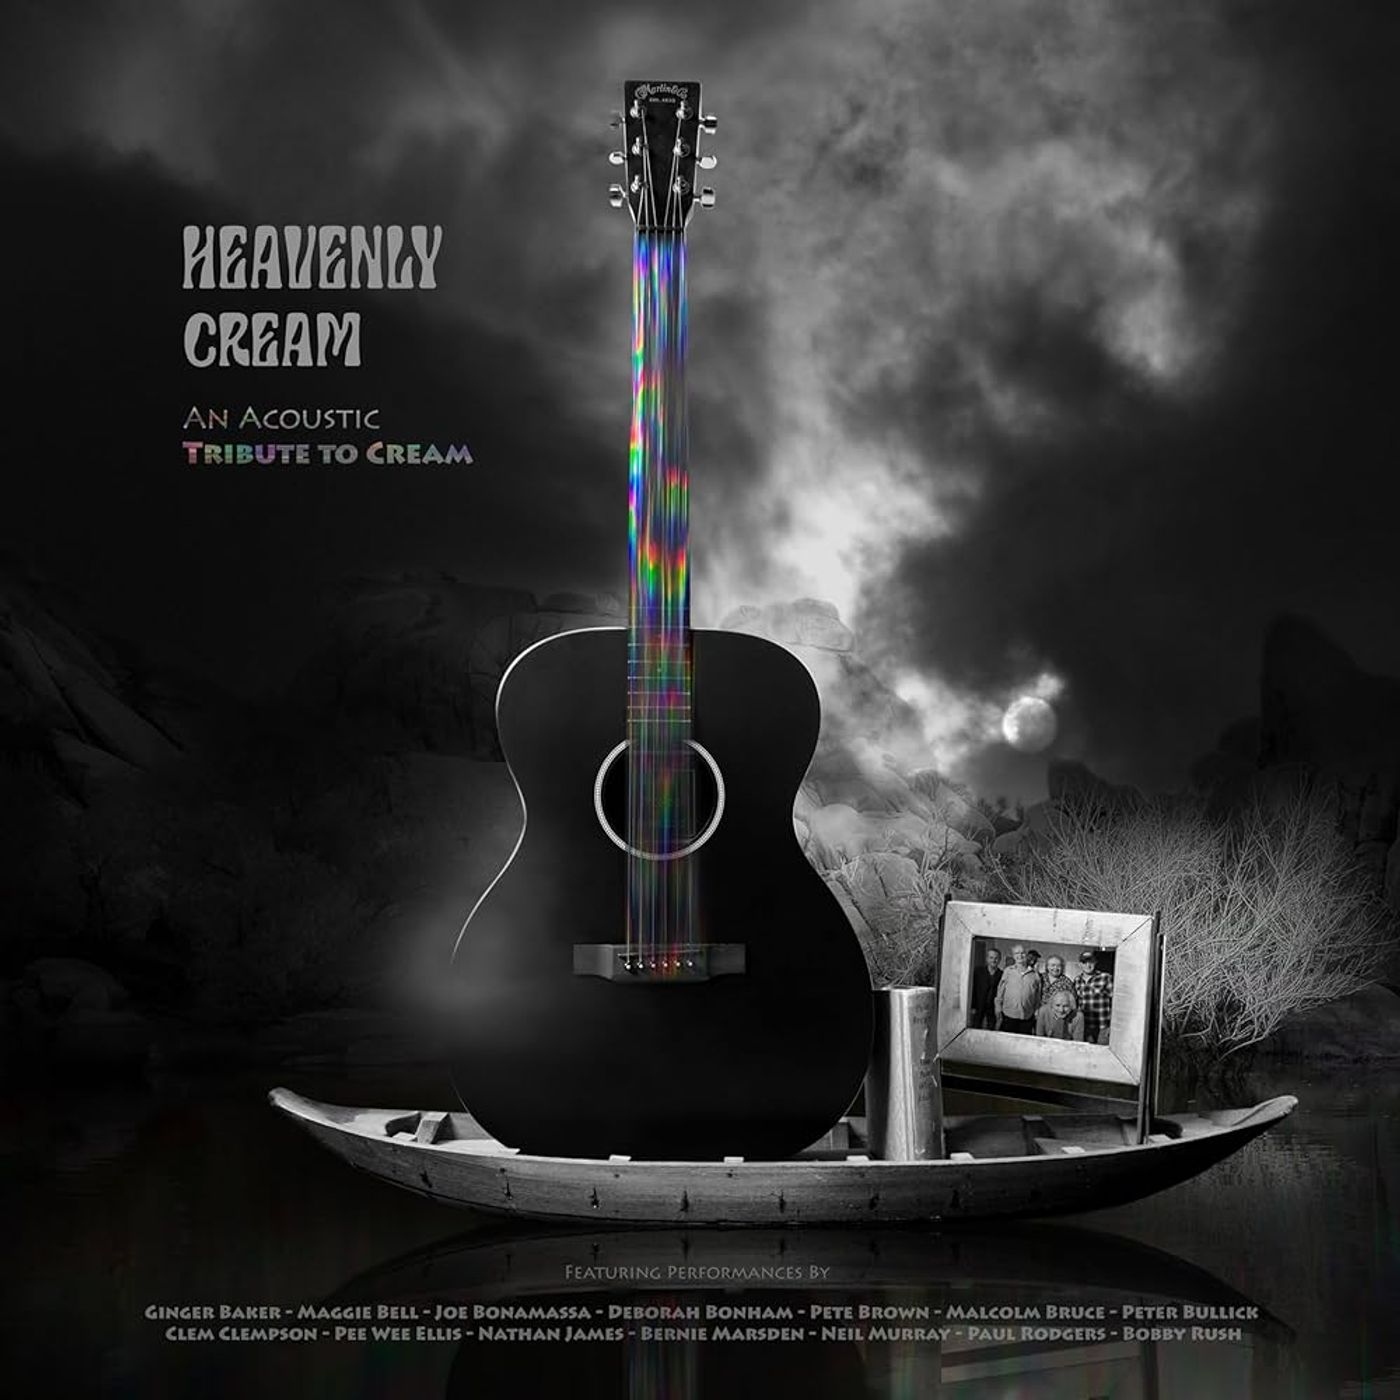 Malcolm Bruce - Heavenly Cream: an acoustic tribute to Cream